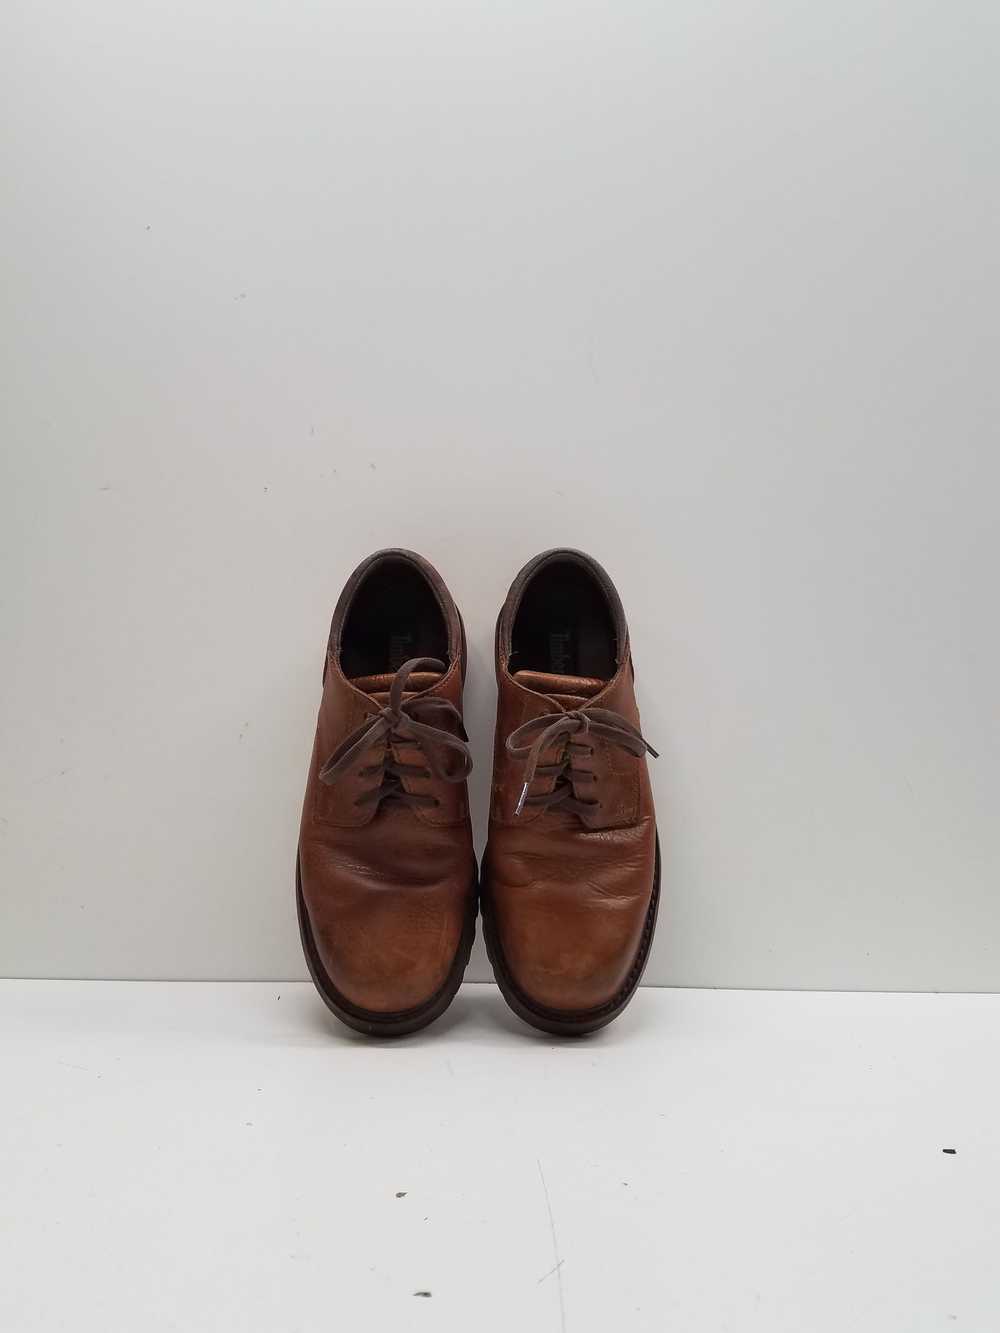 Timberland Brown Lace Up Men's Size 7.5M - image 6